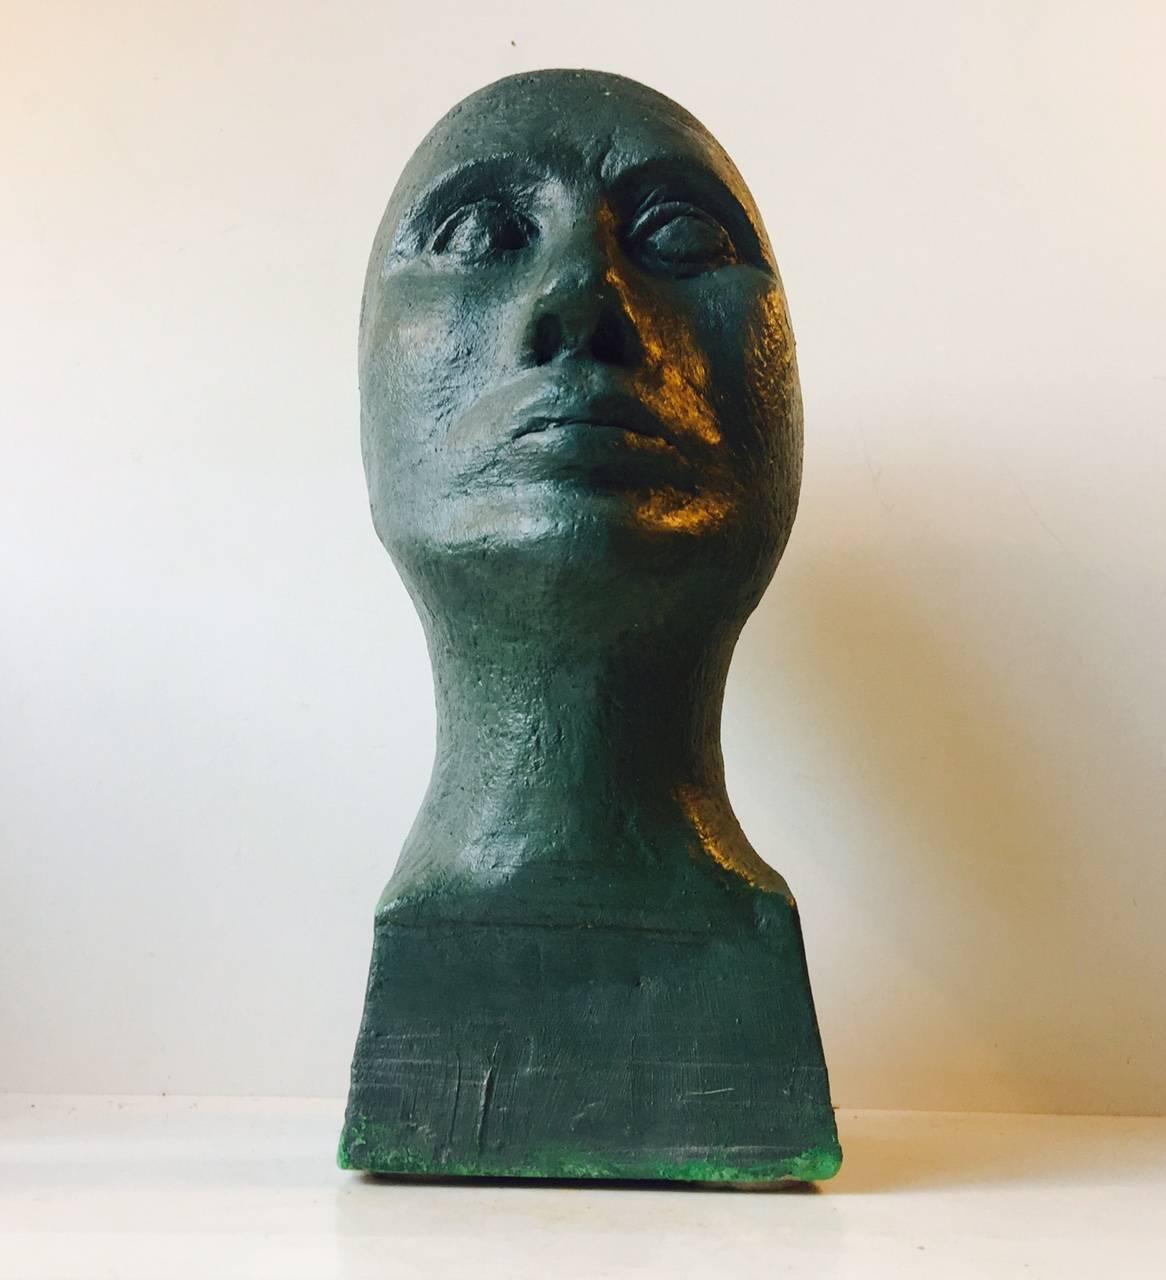 Monumental concrete bust with a verdigris green finish. Everything about is anonymous. However it displays a sudden mount of contemporary artistic quality and would serve as an ice-breaker to any minimalistic interior. The flat surfaces to the sides